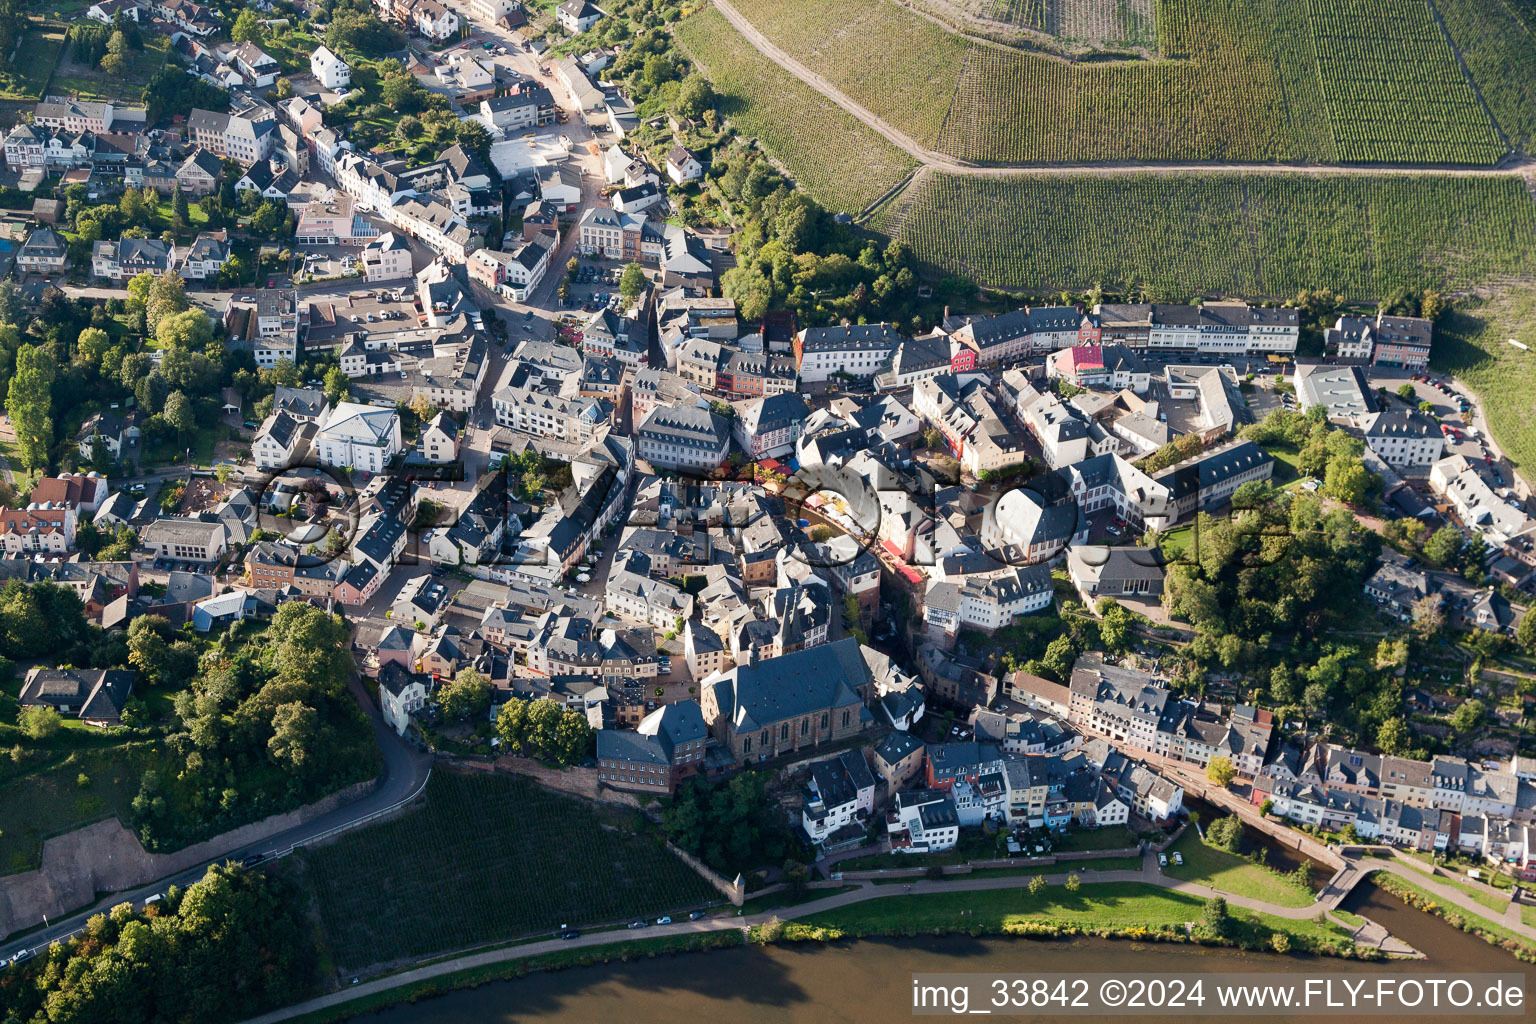 Aerial view of Village on the river bank areas of the river Saar in the district Beurig in Saarburg in the state Rhineland-Palatinate, Germany